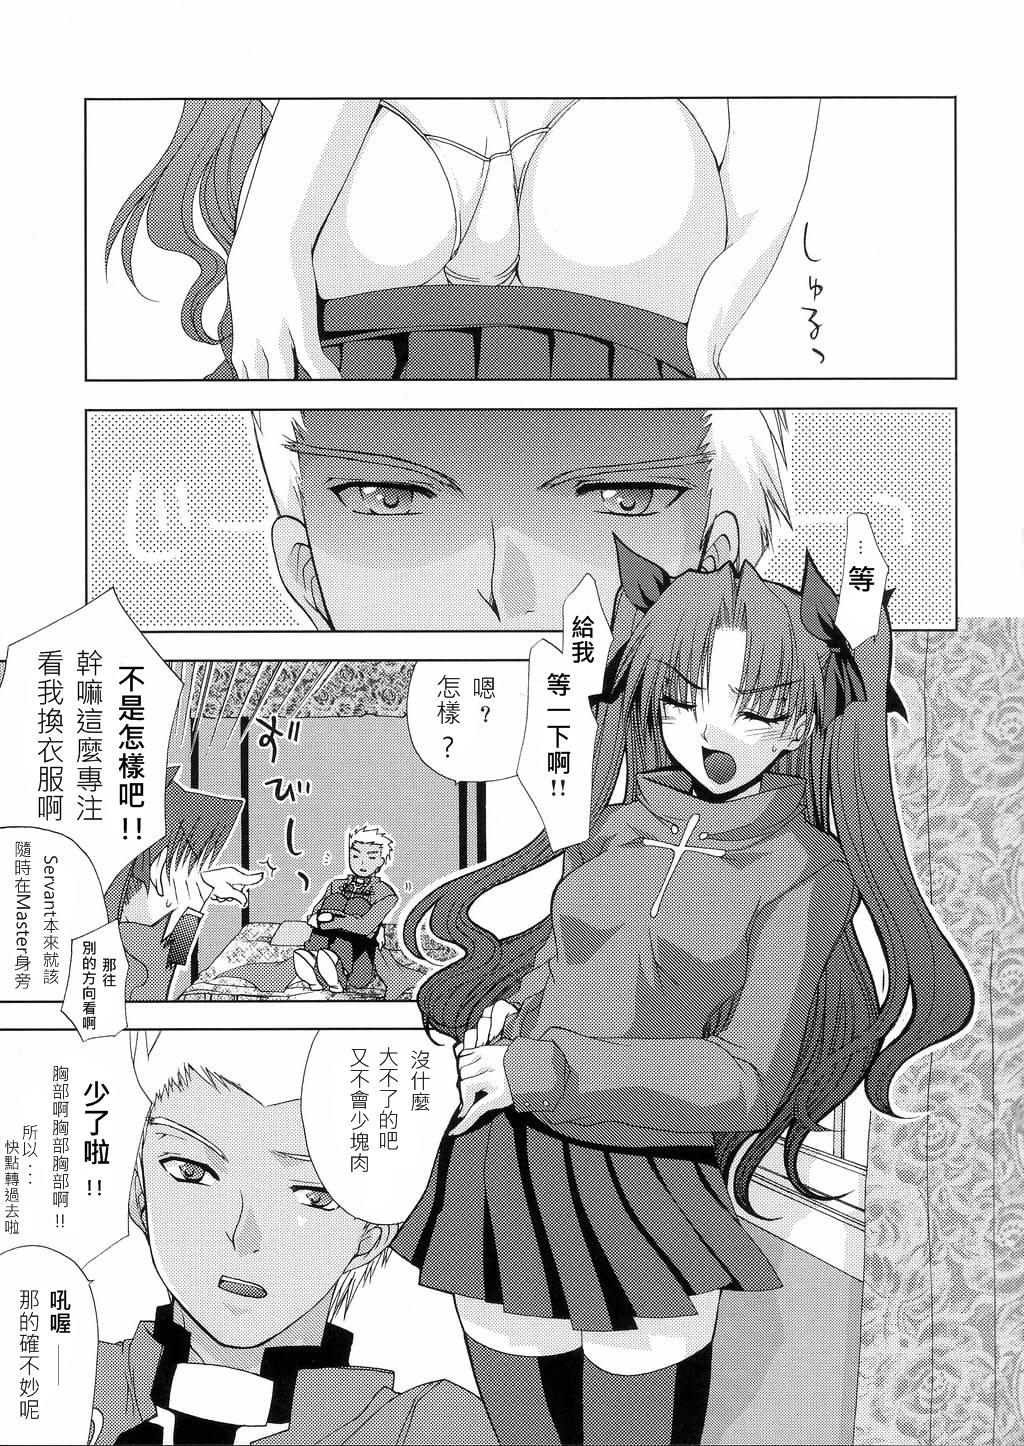 Hot Girls Getting Fucked permeate - Fate stay night Cutie - Page 5